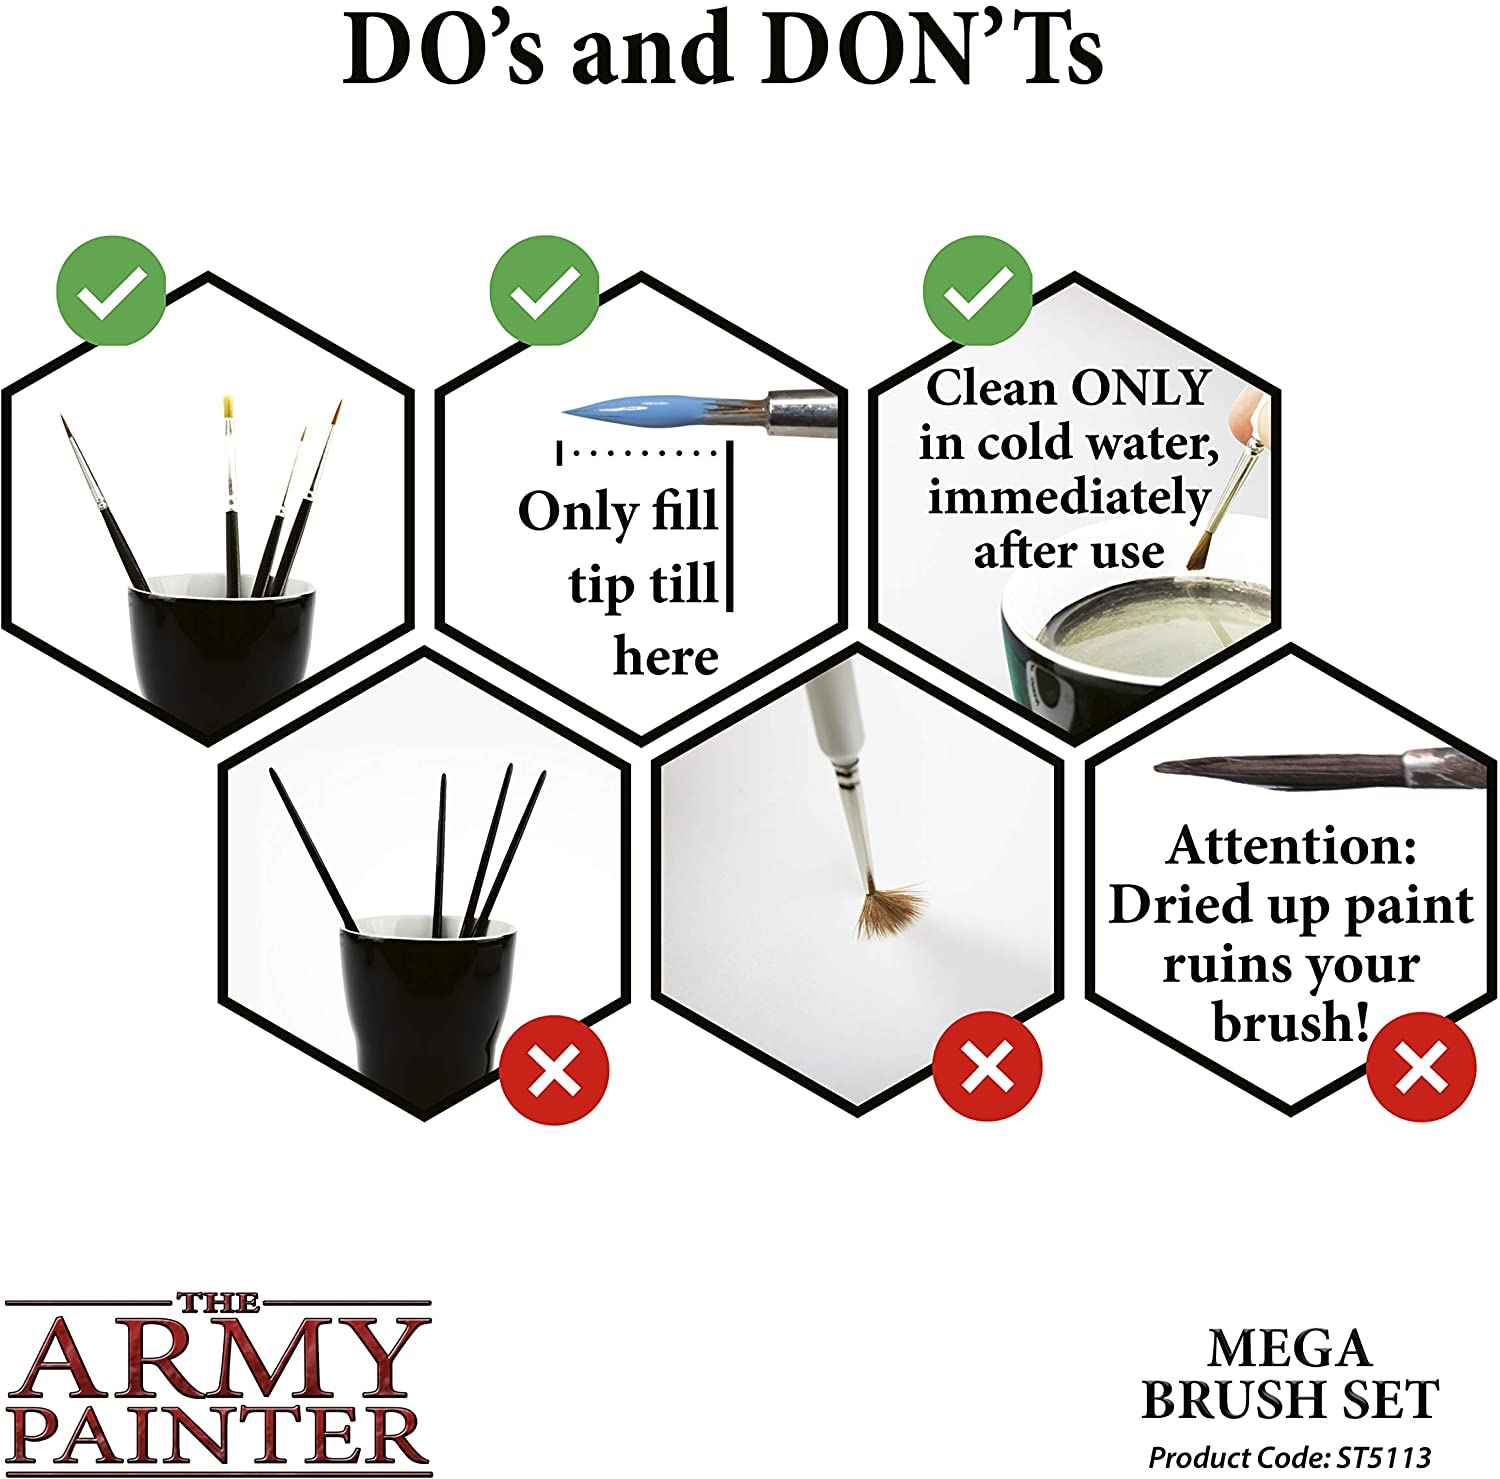 The Army Painter Wargames Mega Brush Set dos and donts